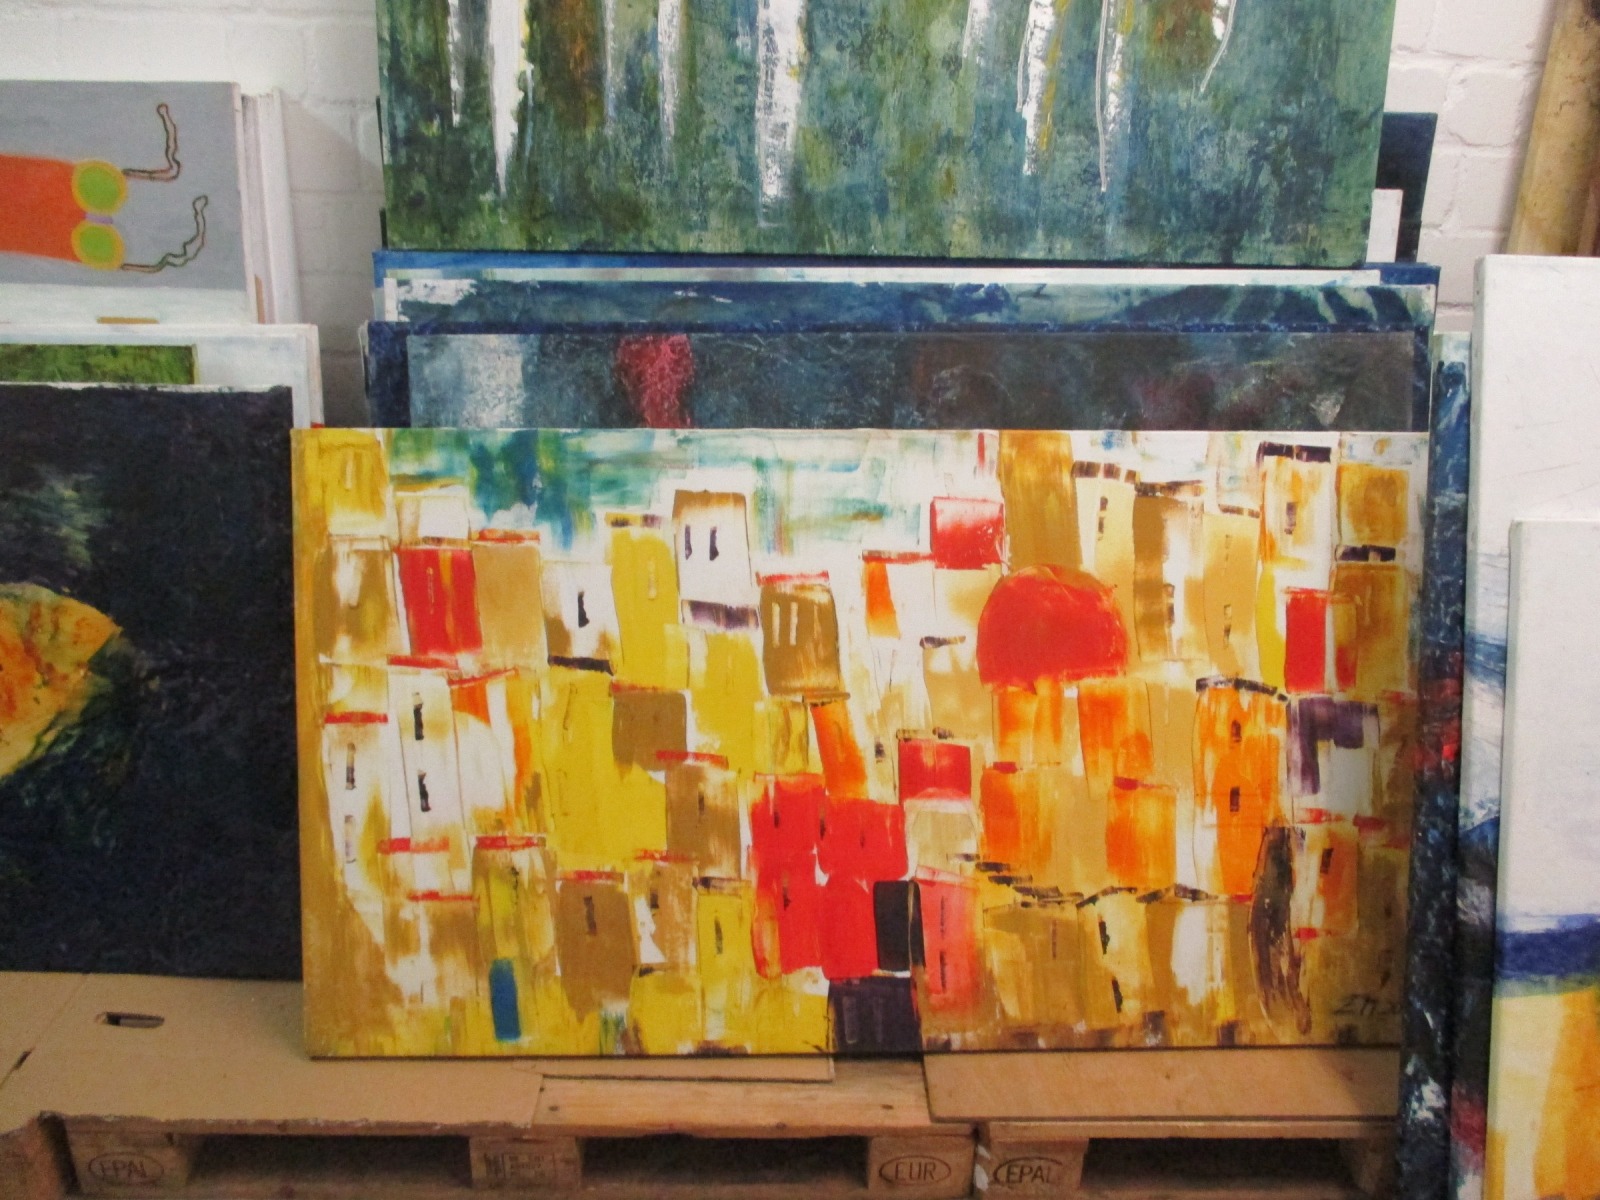 sunny citiy Painting, Art, abstract Canvas, Original by Sonja Zeltner-Müller 80x155cm 2